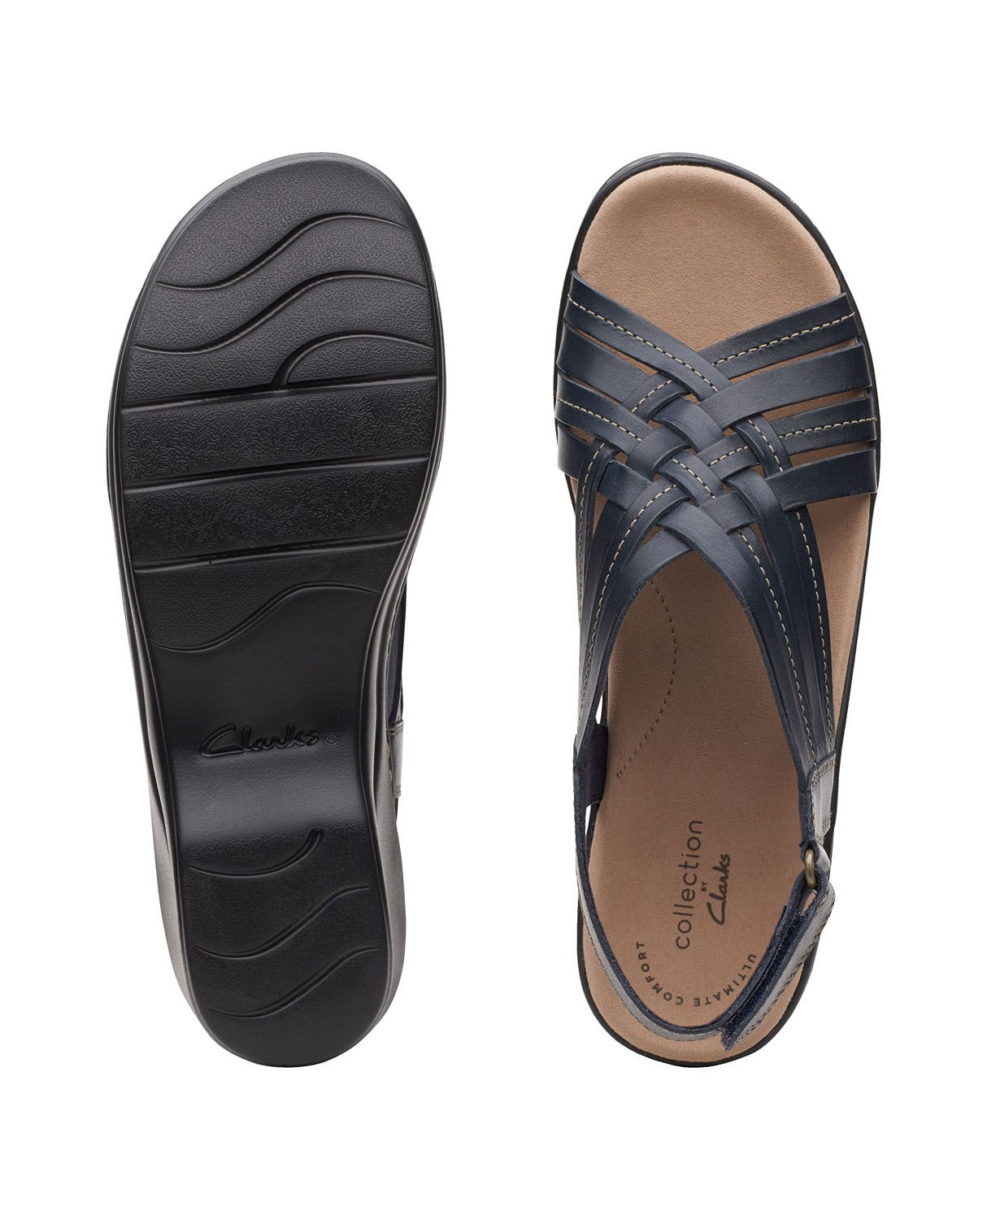 woocommerce-673321-2209615.cloudwaysapps.com-clarks-collection-womens-navy-leather-lexi-carmen-sandals